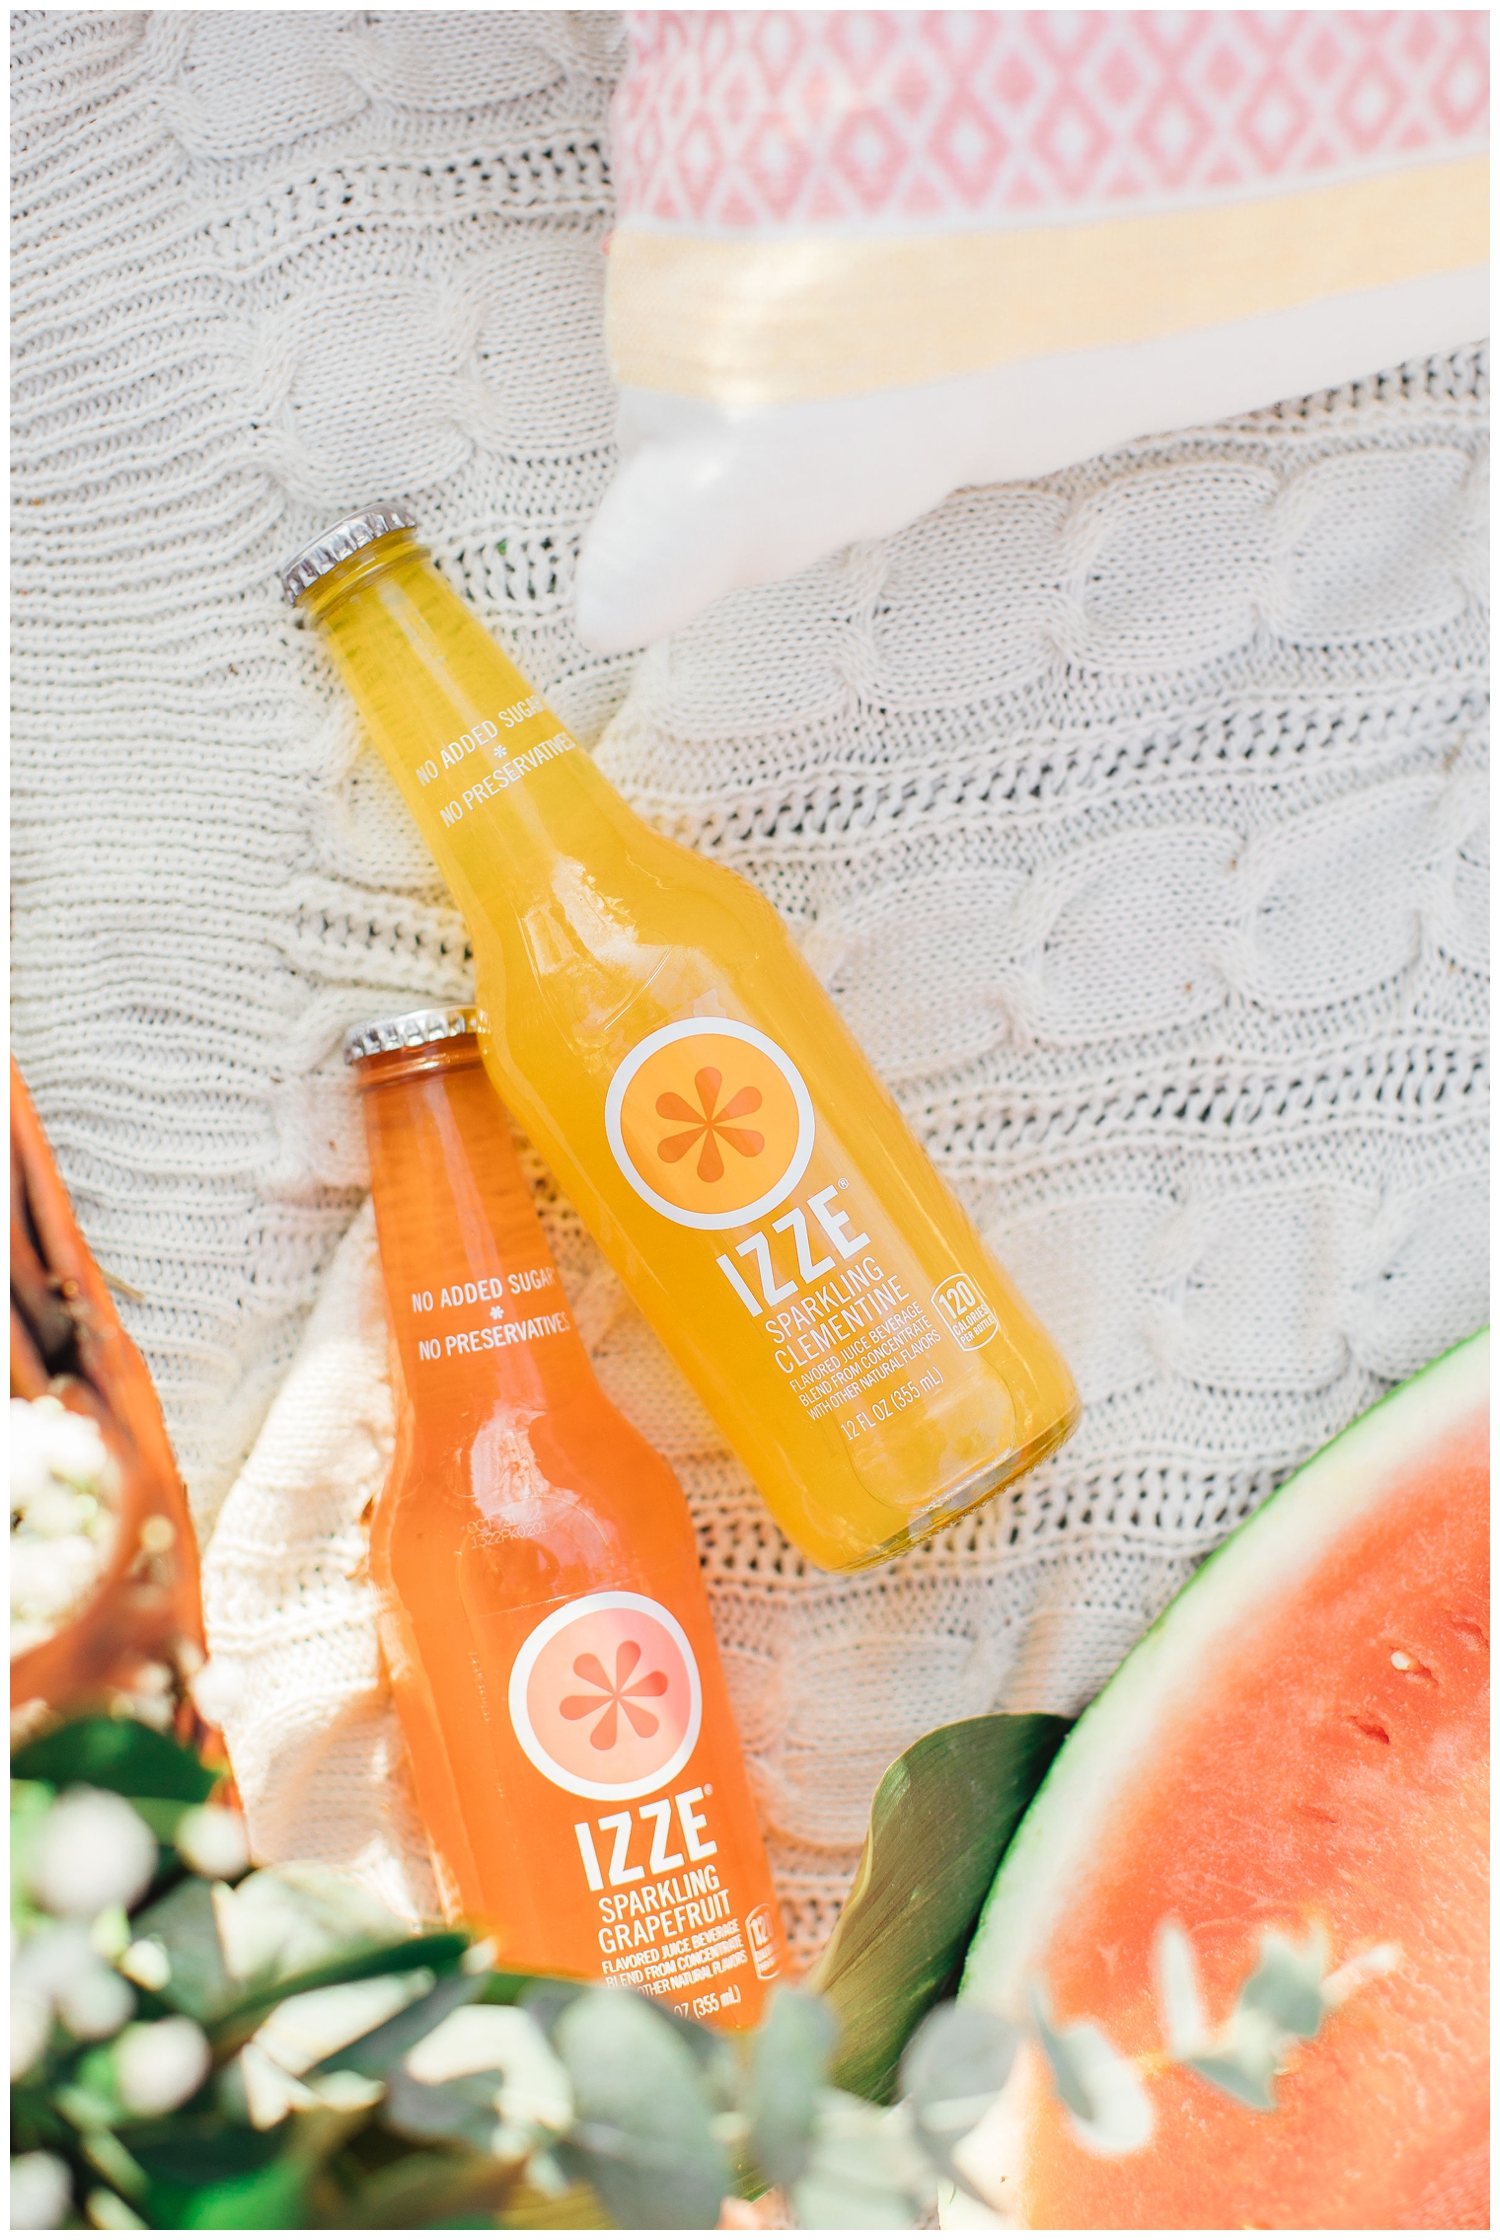 detail image of Izze drink bottles and watermelon for spring picnic senior pictures